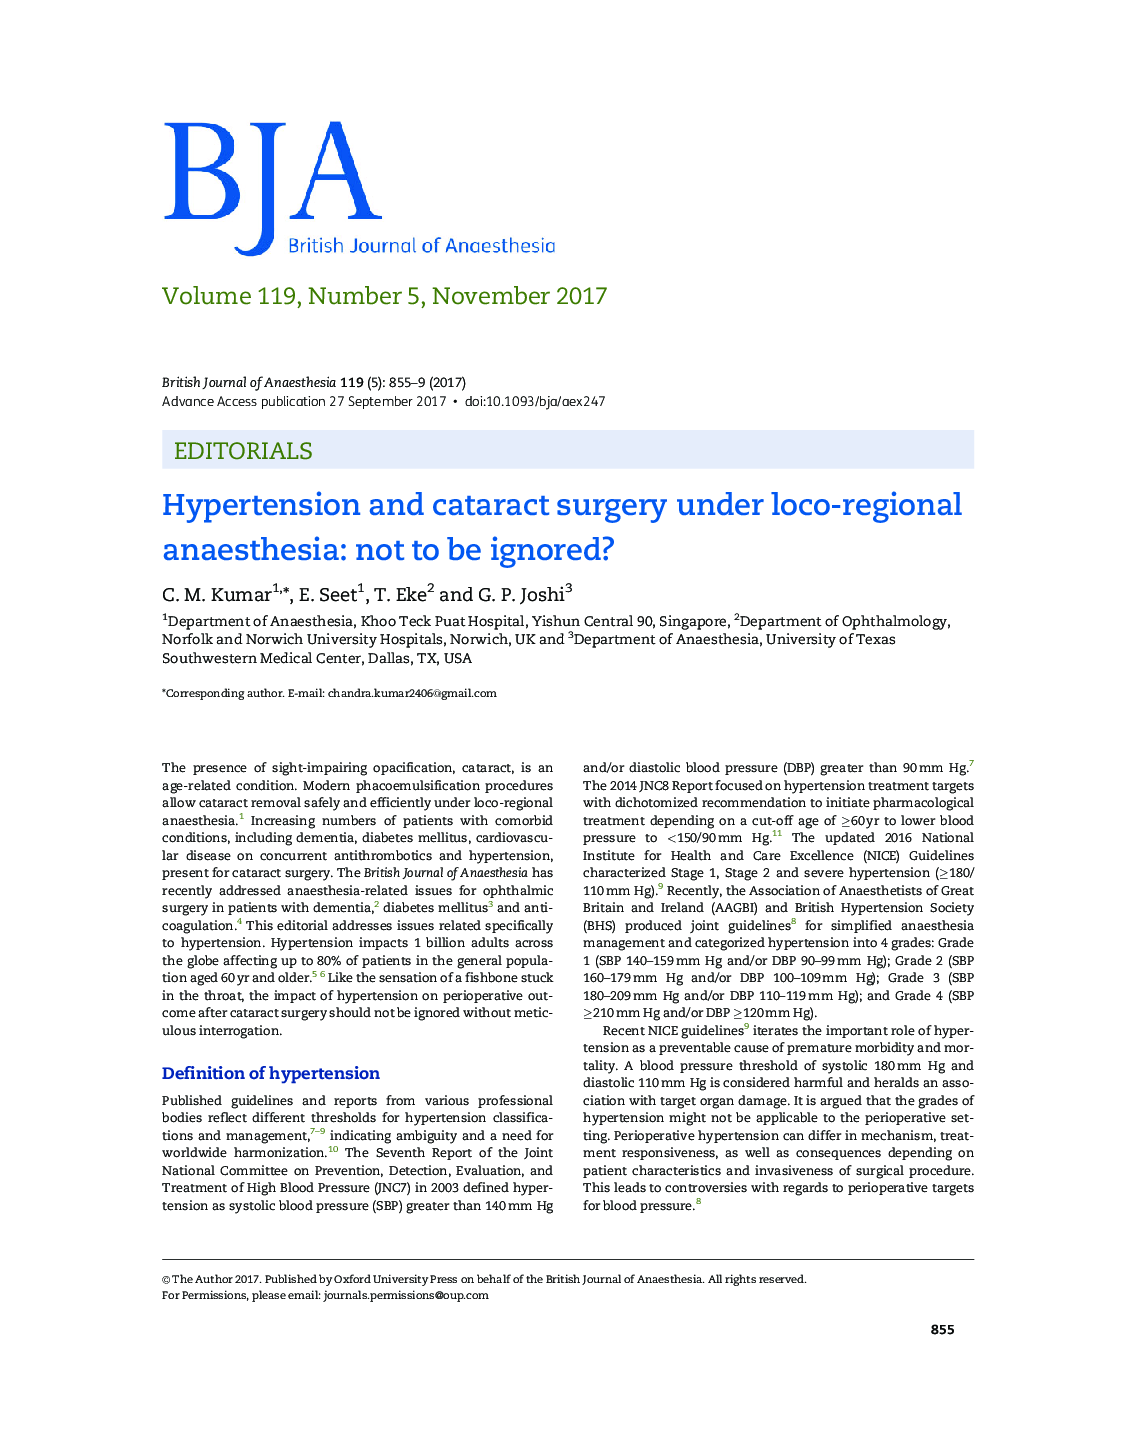 Hypertension and cataract surgery under loco-regional anaesthesia: not to be ignored?